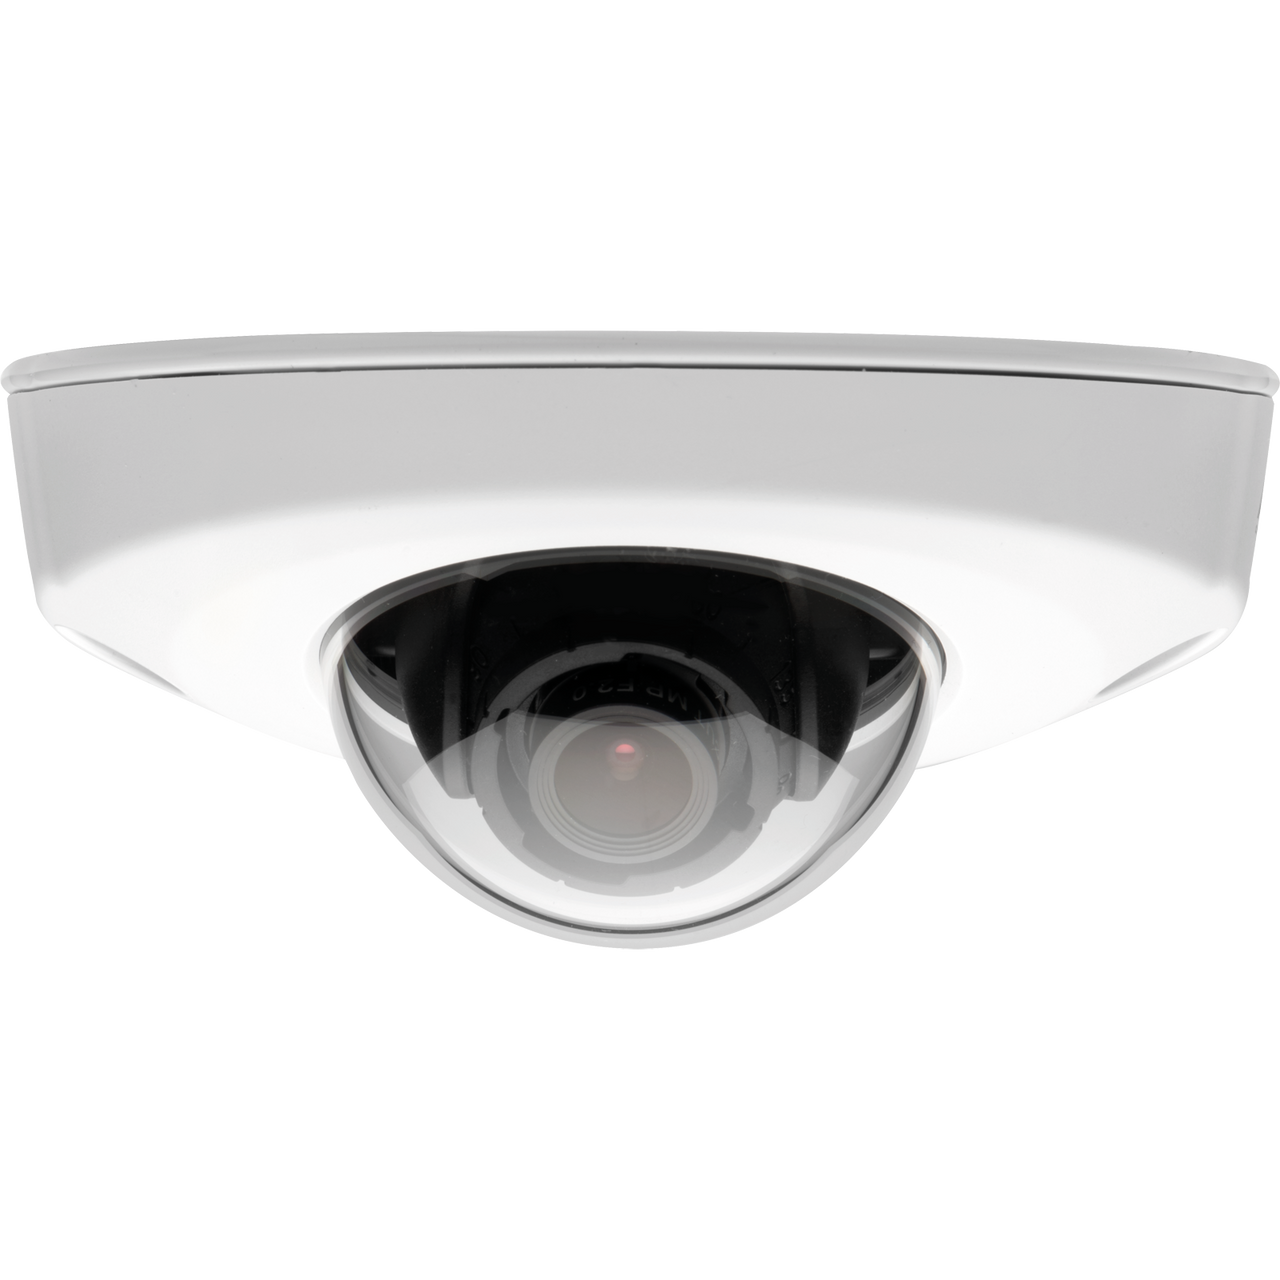 AXIS P3904-R Mk II Onboard HDTV 720p surveillance with Zipstream